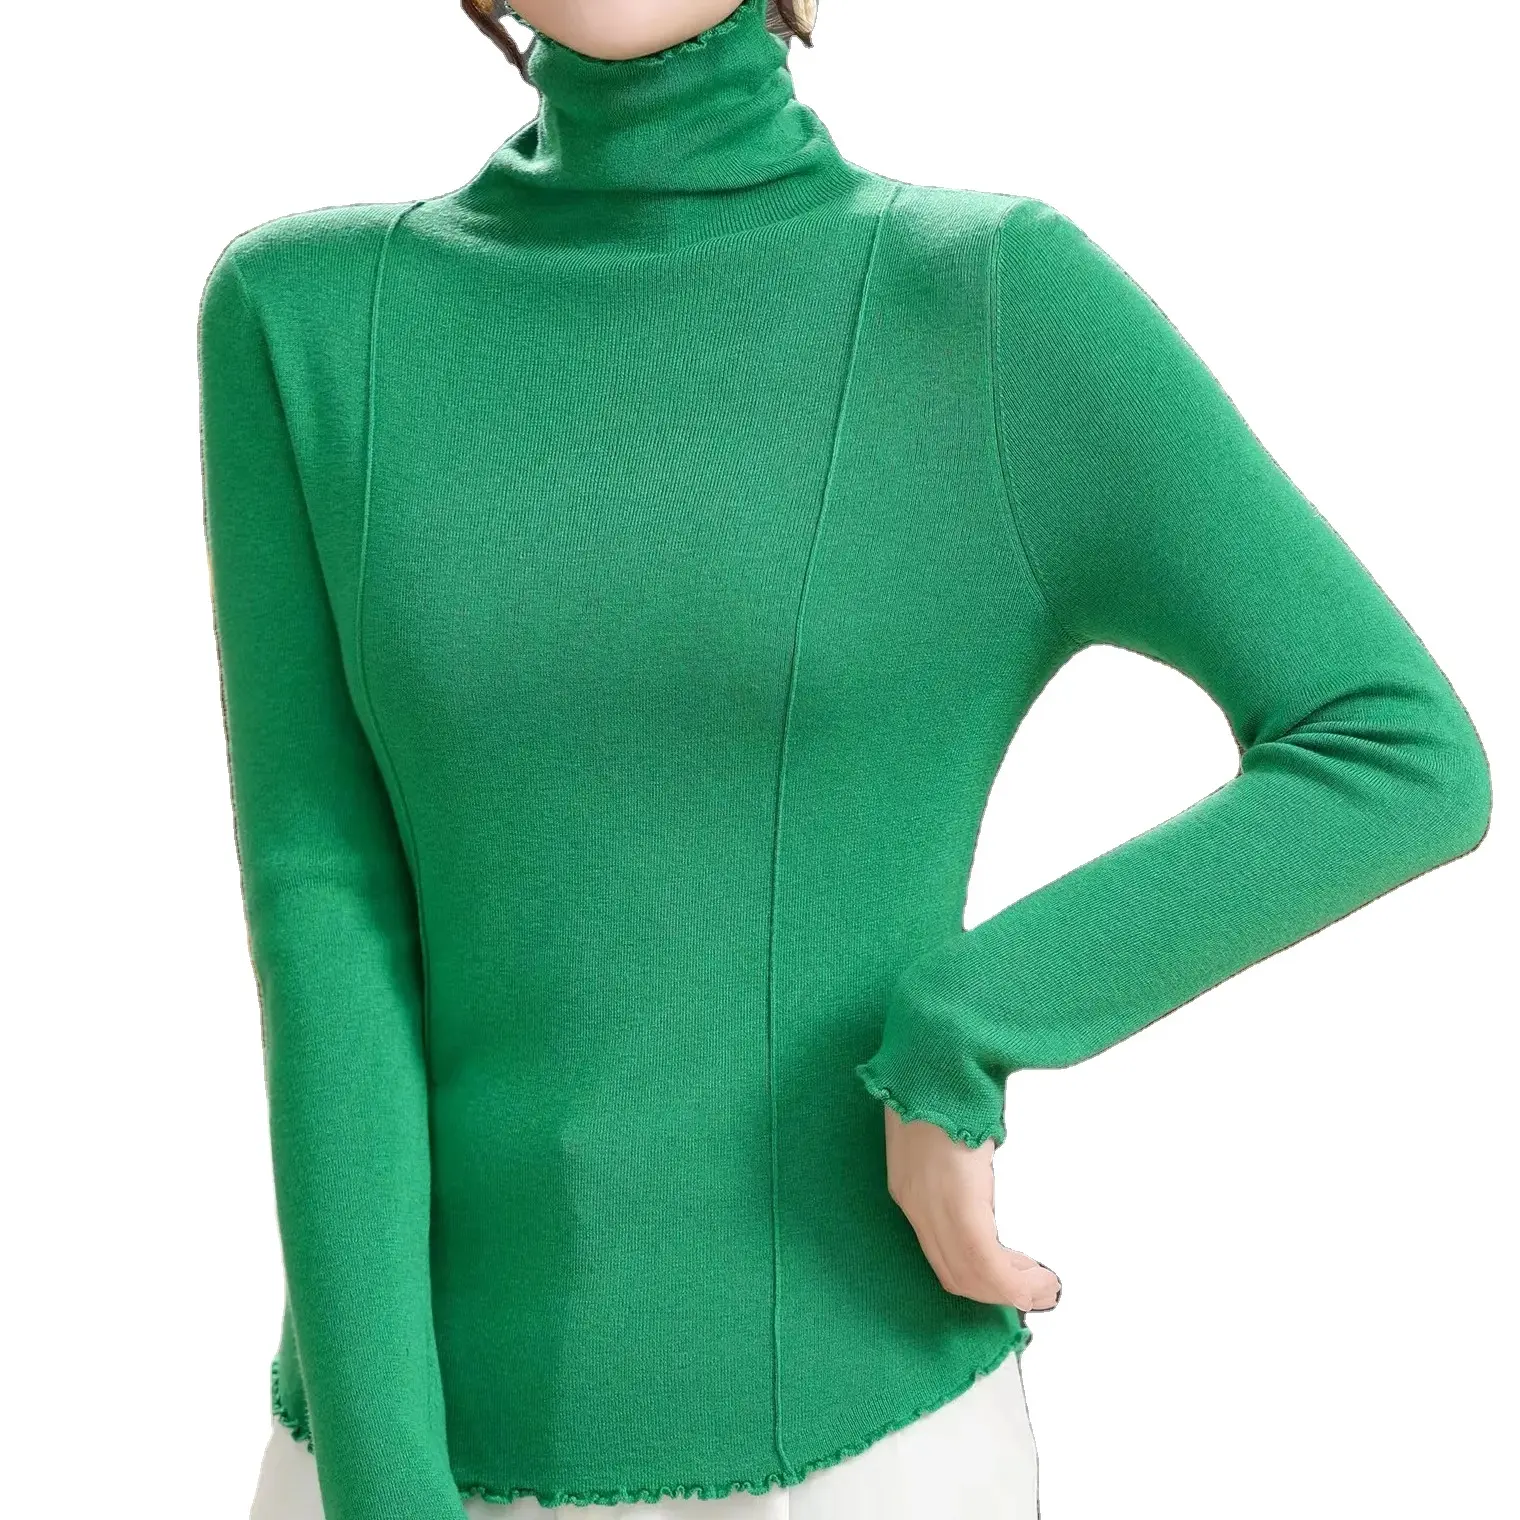 Winter collection designer fashion clothes high neck long sleeves frilly arc hem waist line 16G fine knitted sweater